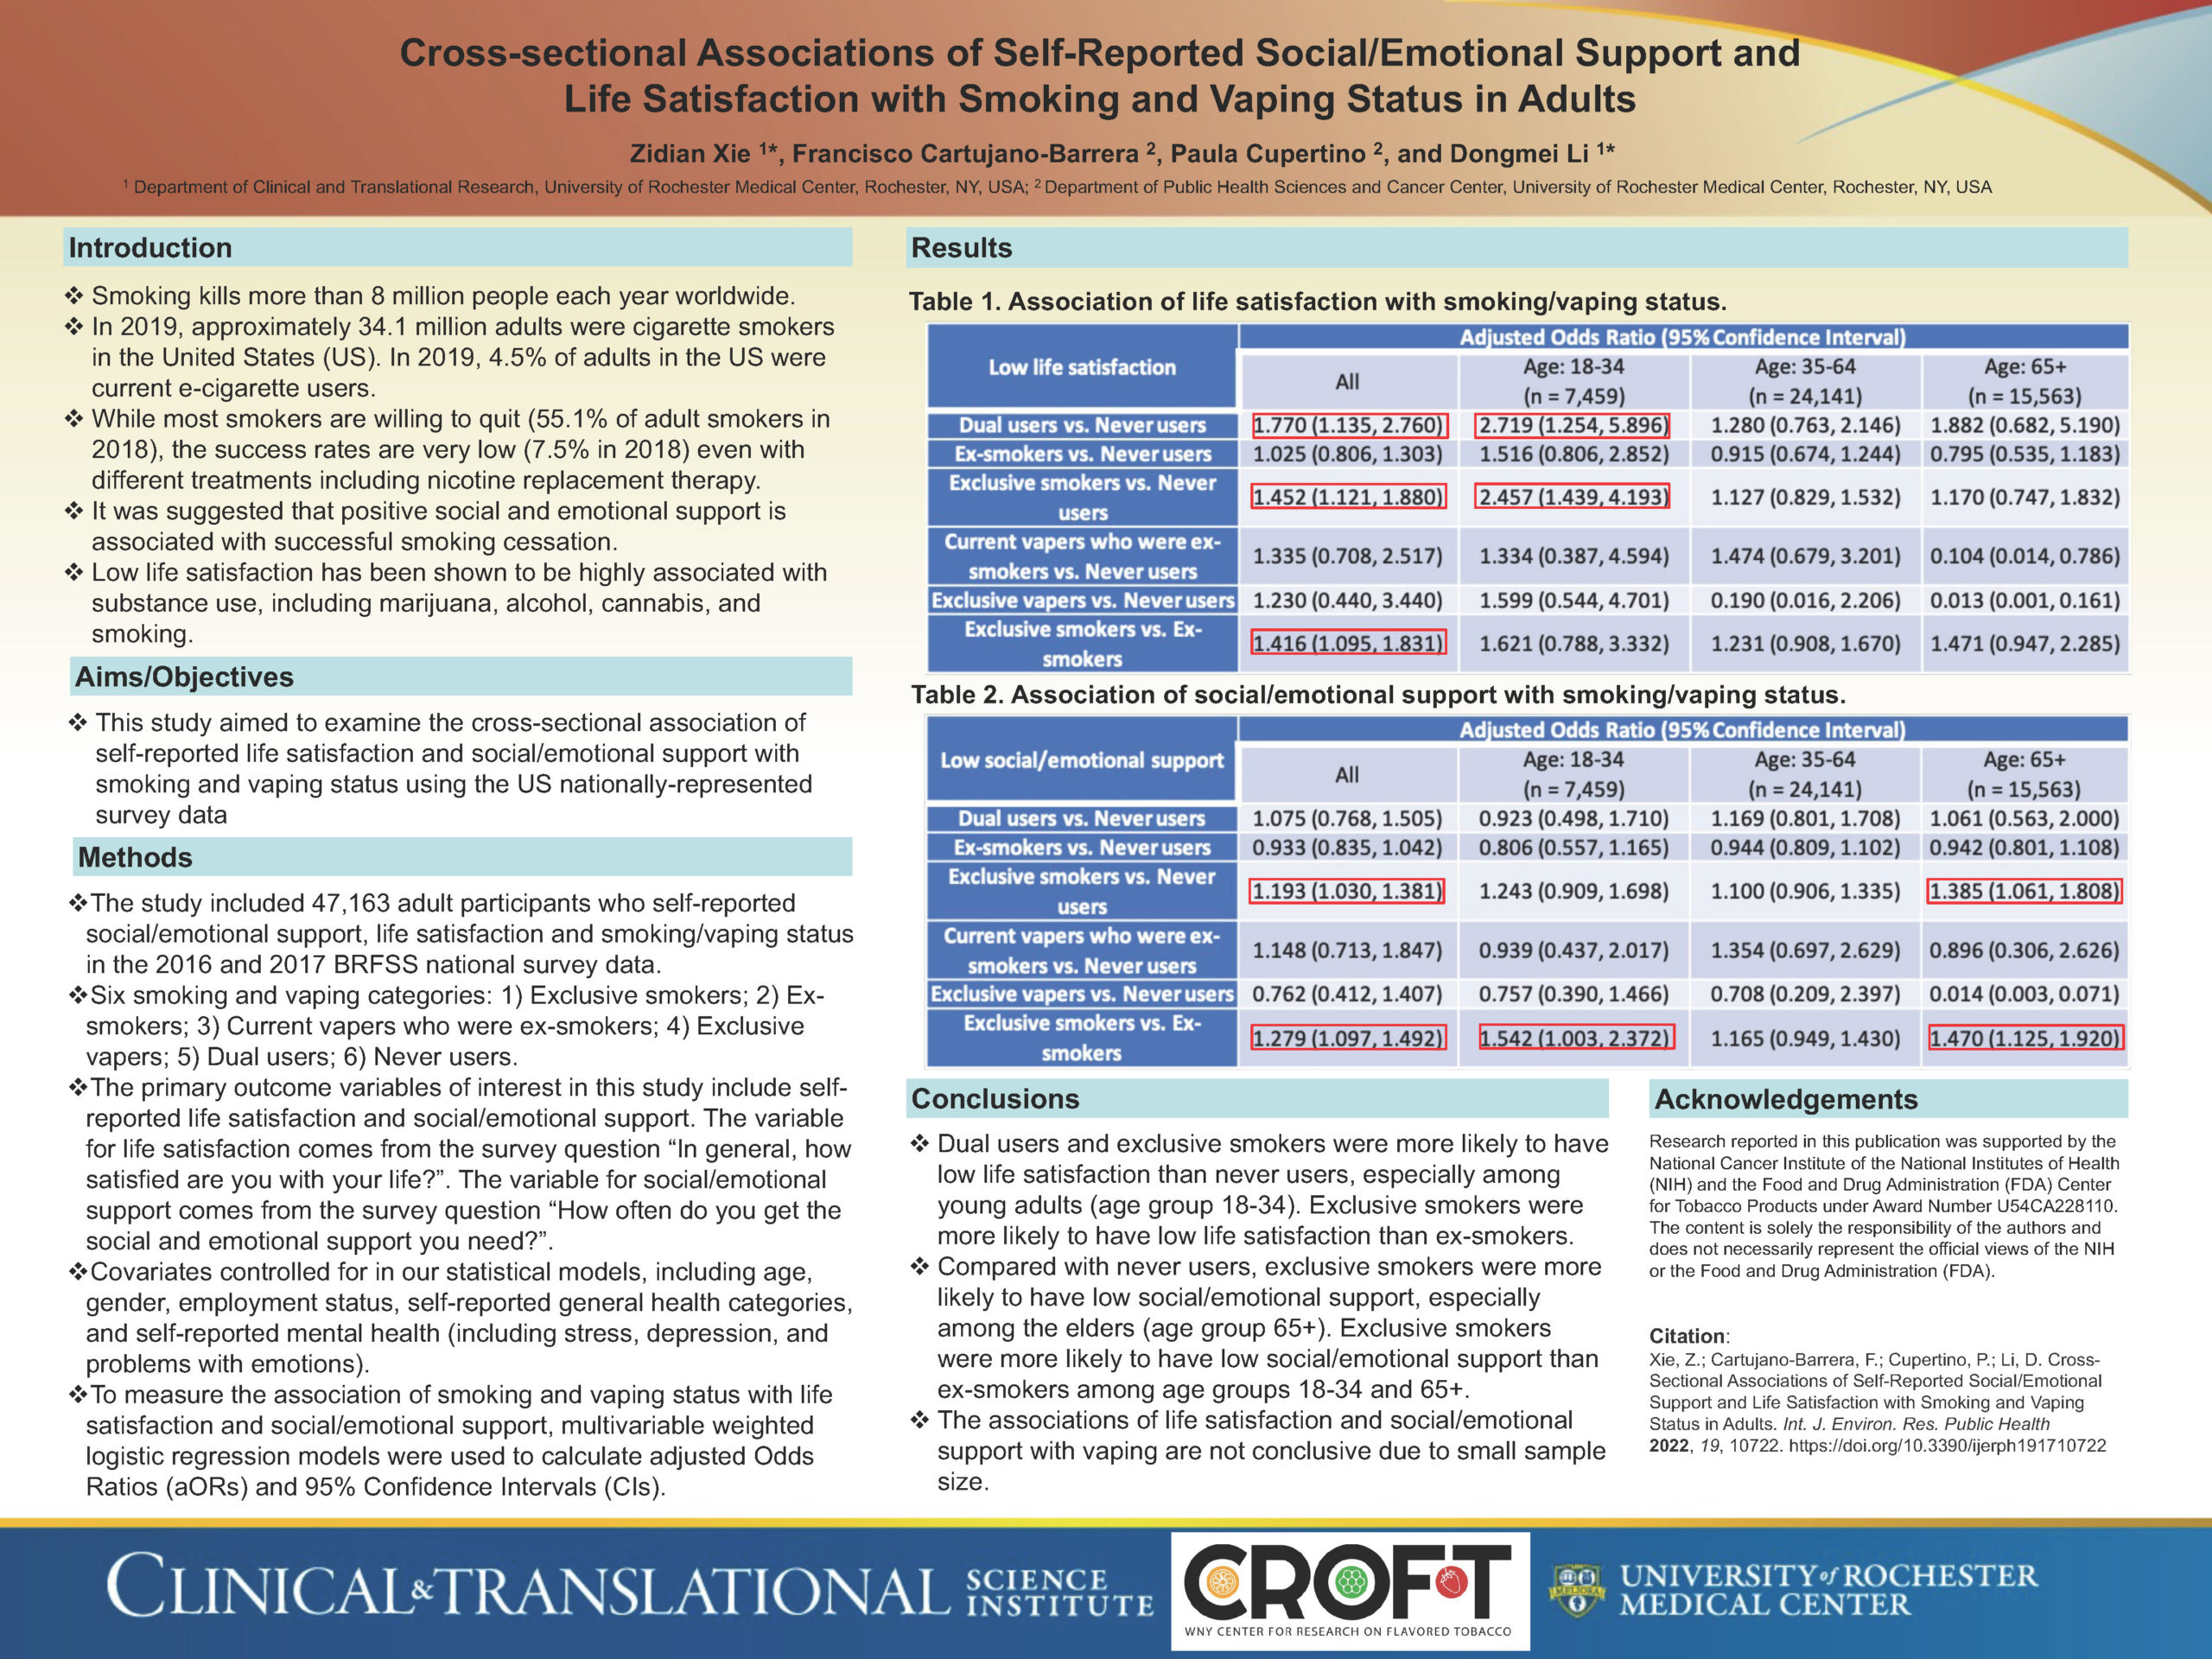 Cross-sectional Associations of Self-Reported Social/Emotional Support and Life Satisfaction with Smoking and Vaping Status in Adults